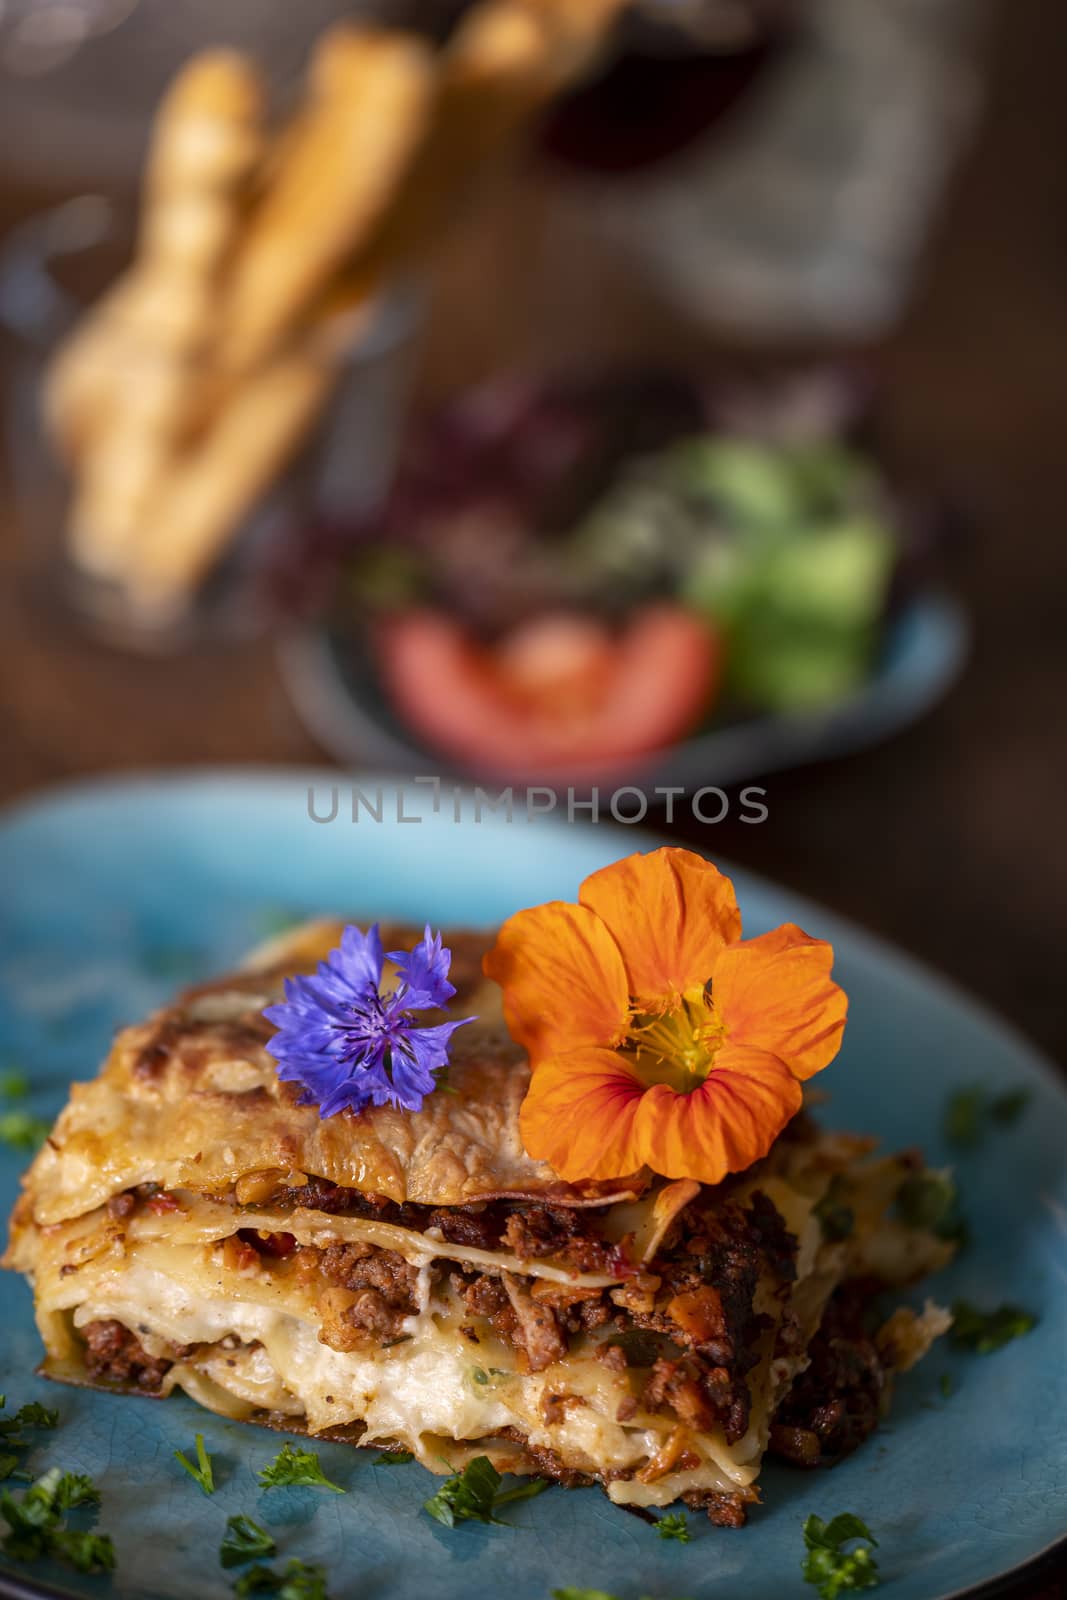 lasagna on a blue plate by bernjuer